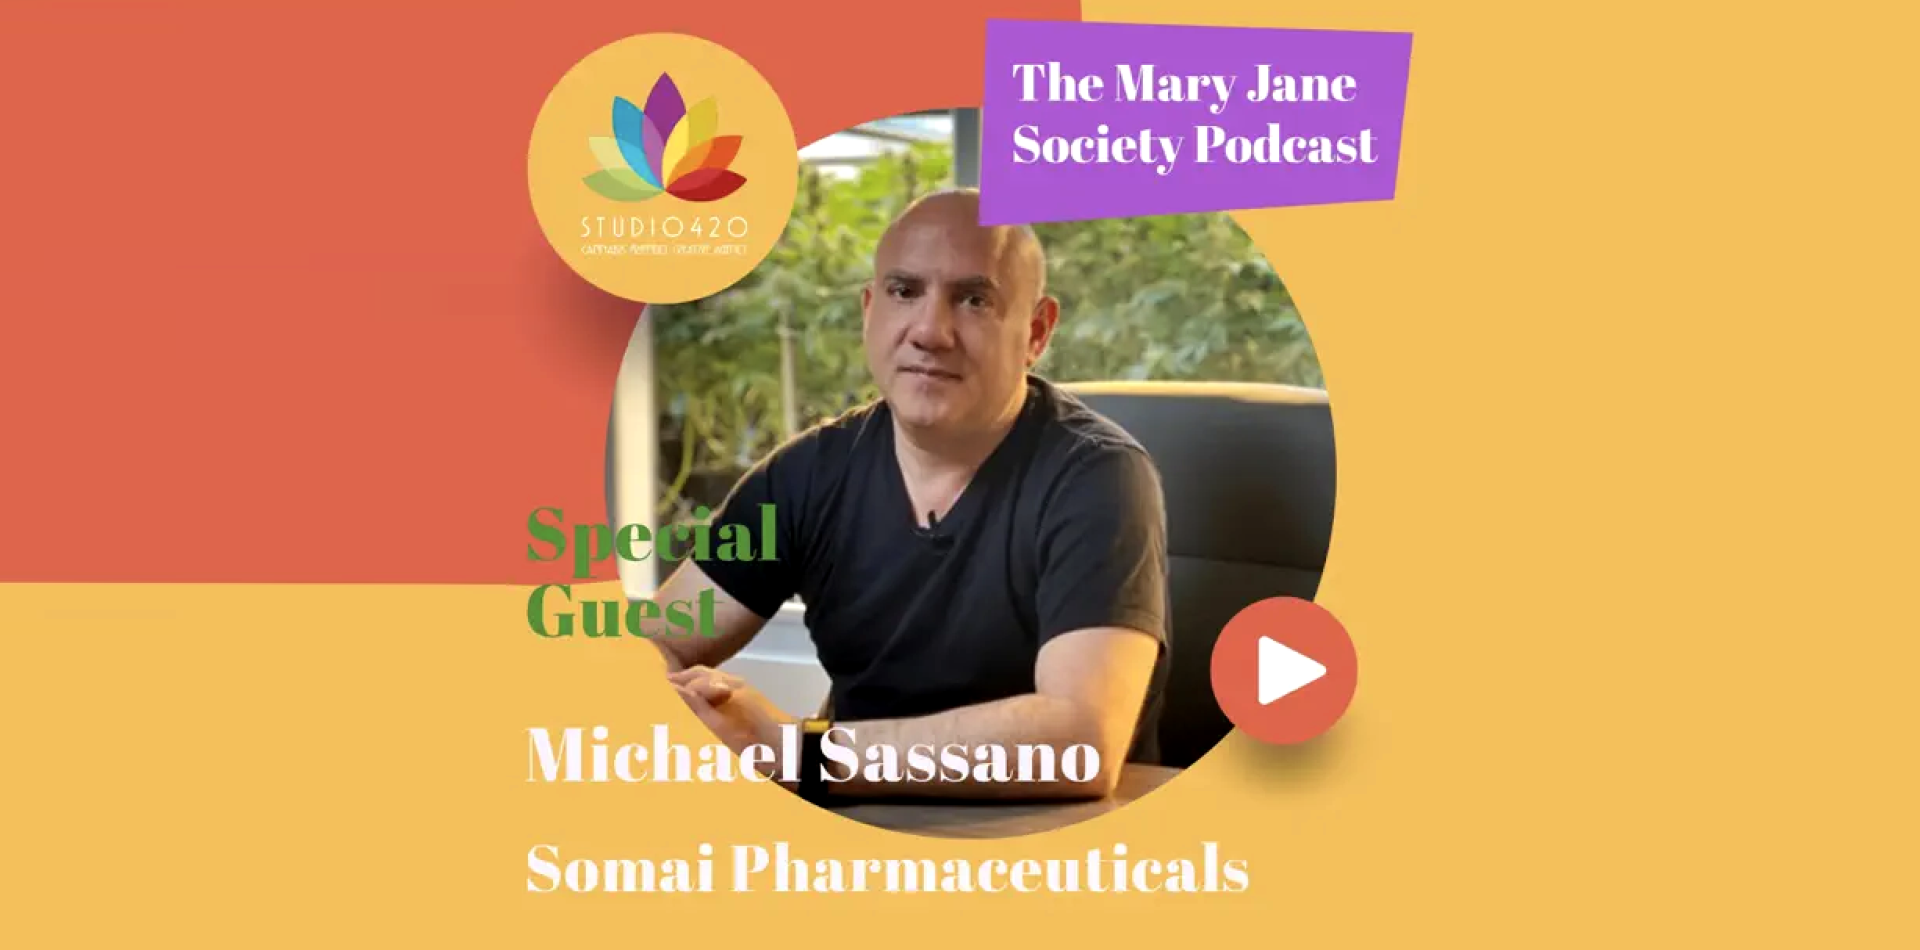 The Mary Jane Society Podcast – Watch Out. Europe Is Gaining Ground Over The U.S. In Cannabis Medicine